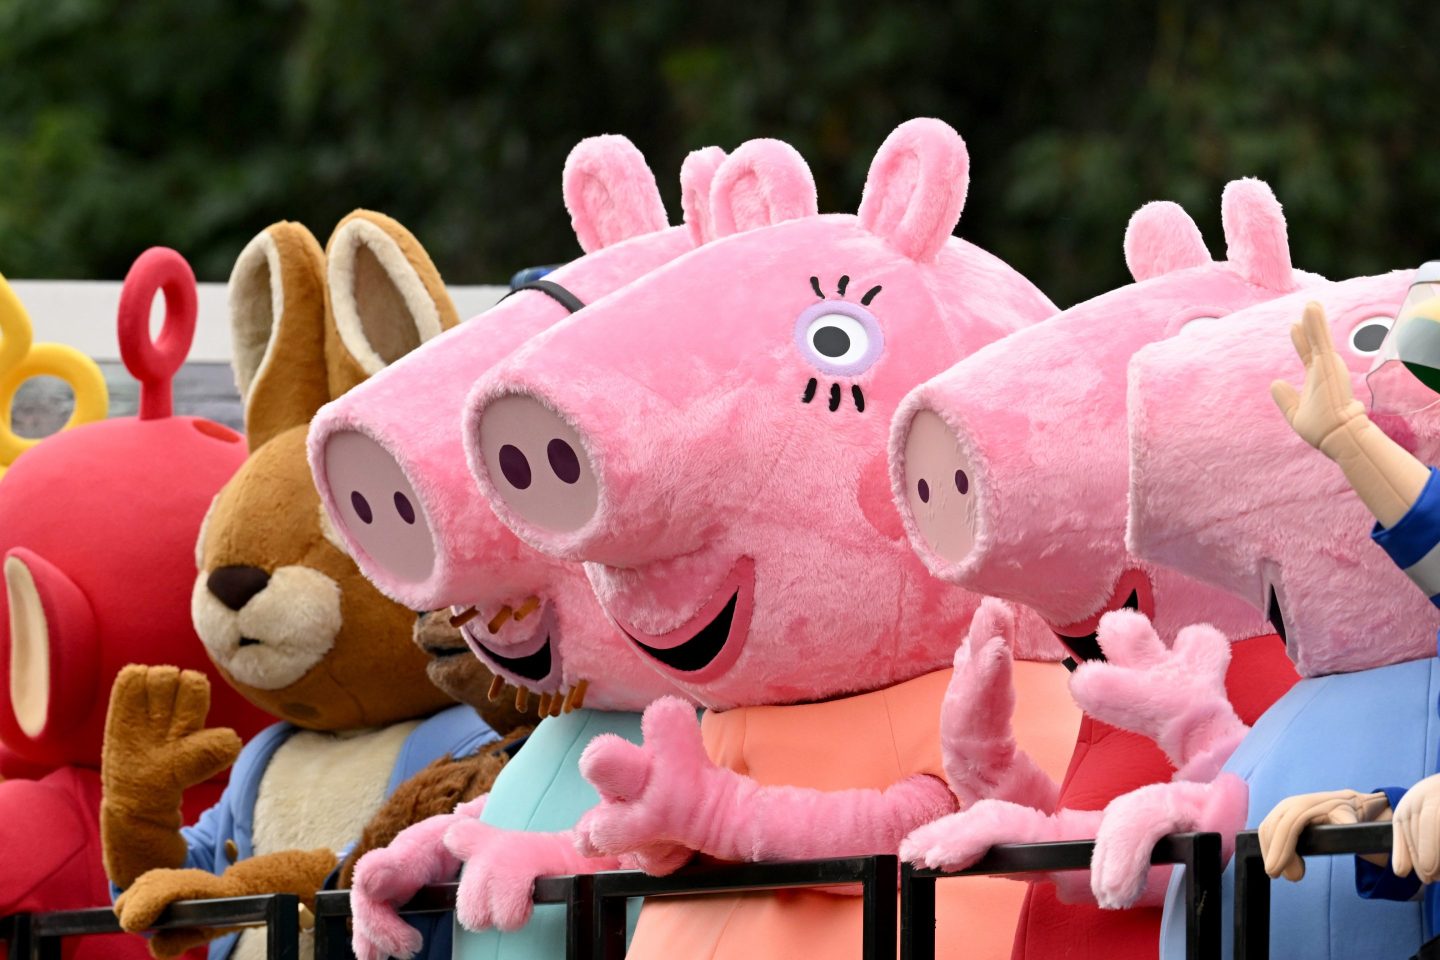 peppa pig mascots standing in a row